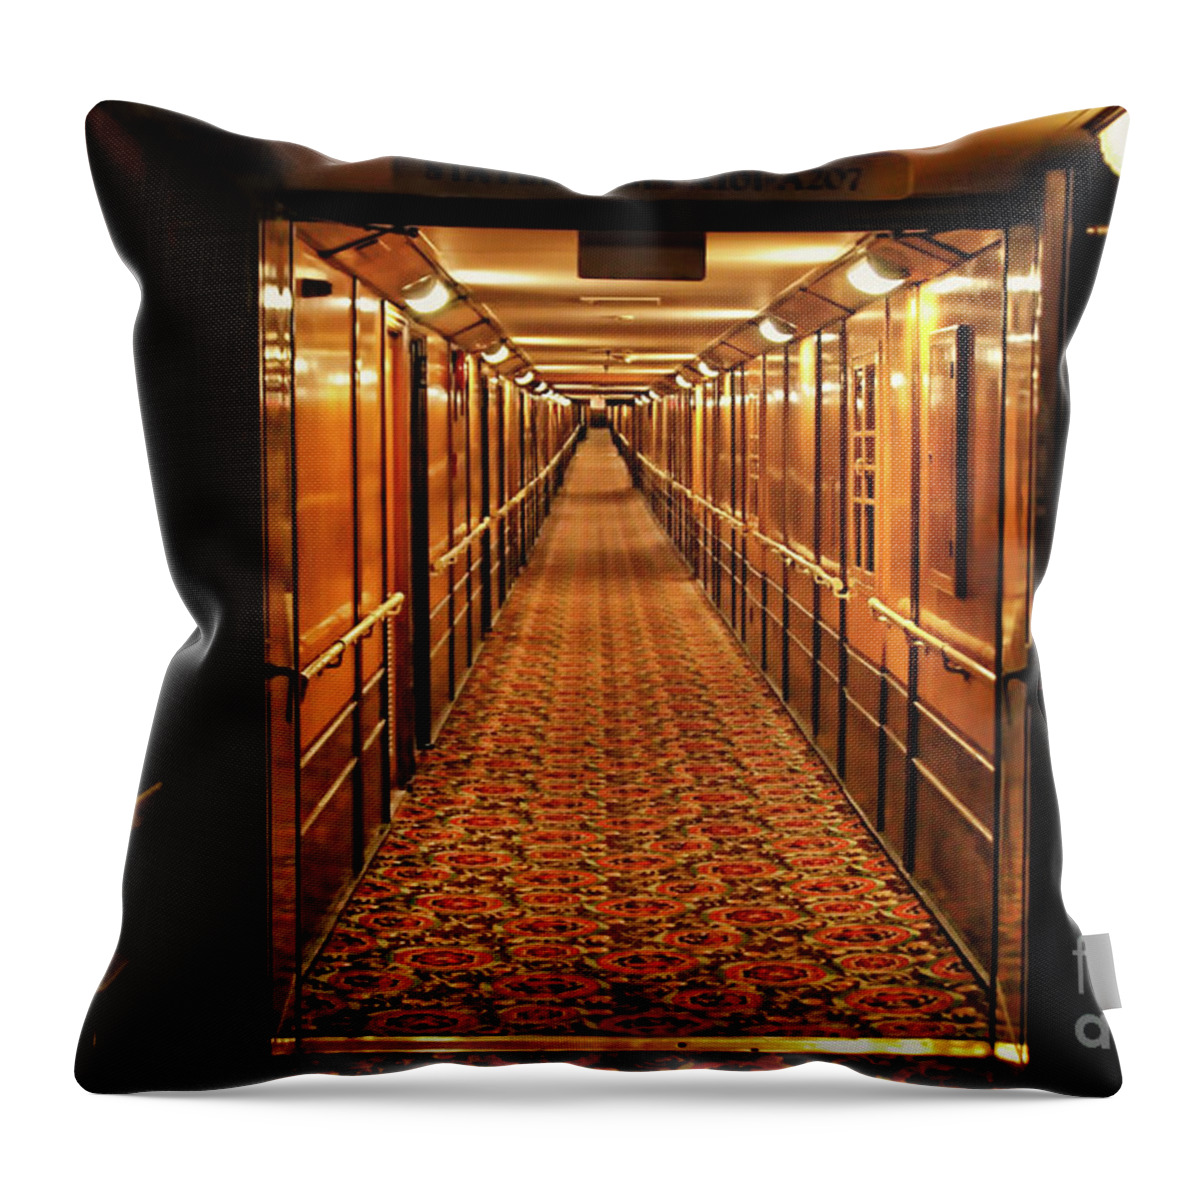 Queen Mary Throw Pillow featuring the photograph Queen Mary Hallway by Mariola Bitner